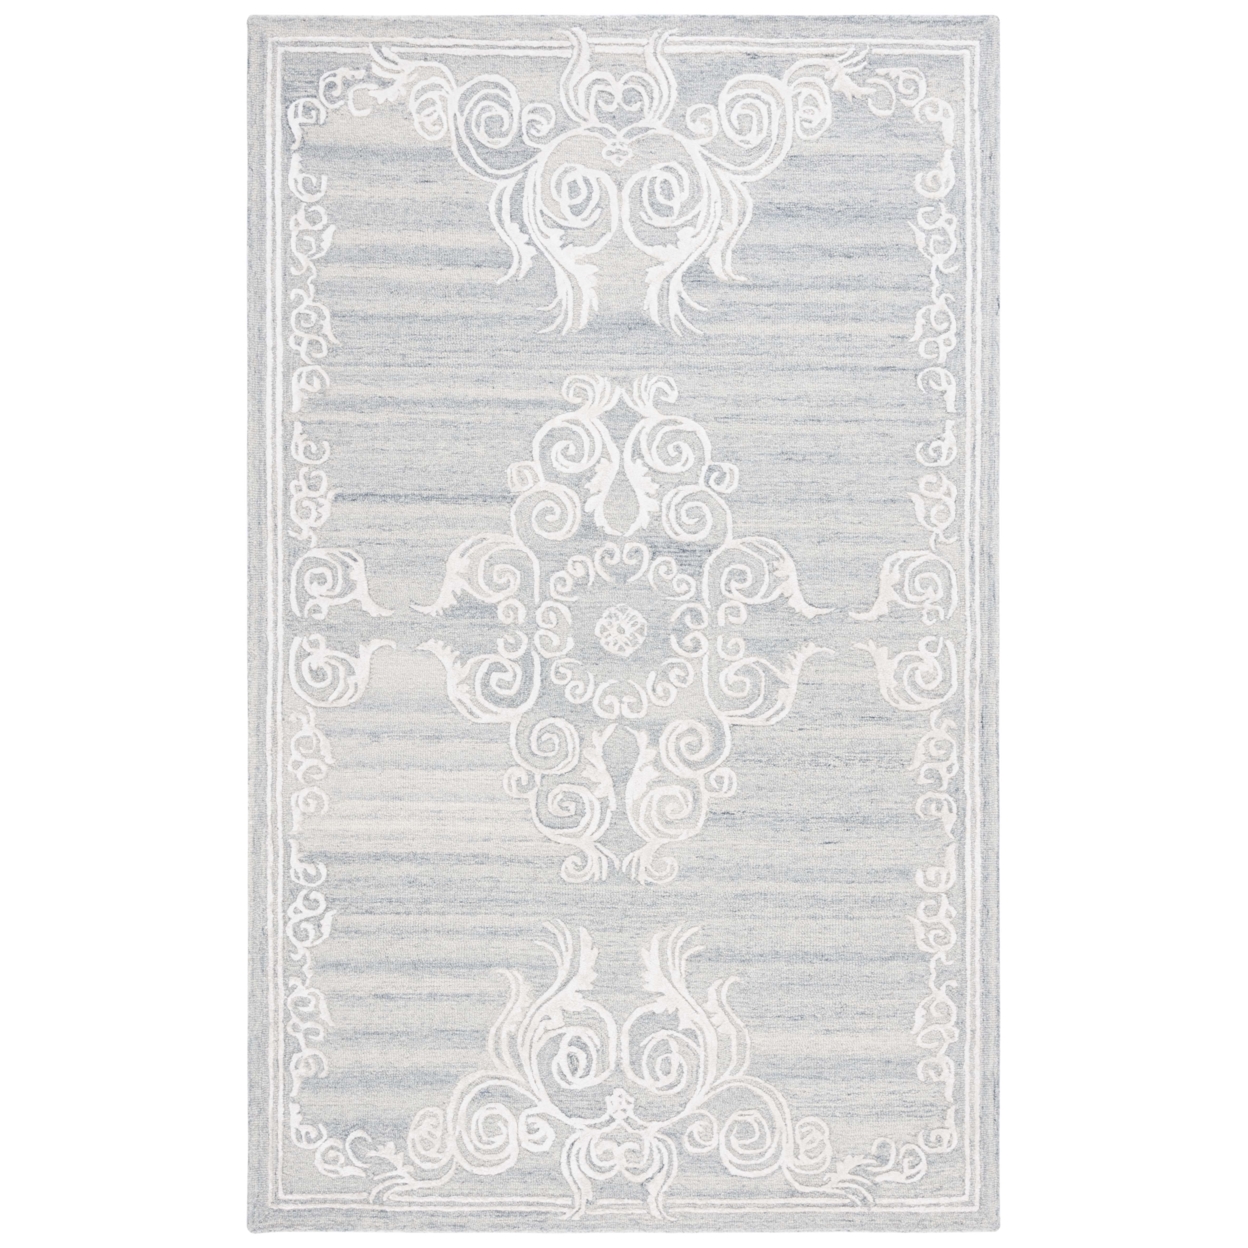 Safavieh GLM604G Glamour Silver / Ivory - Ivory / Brown, 6' X 6' Square